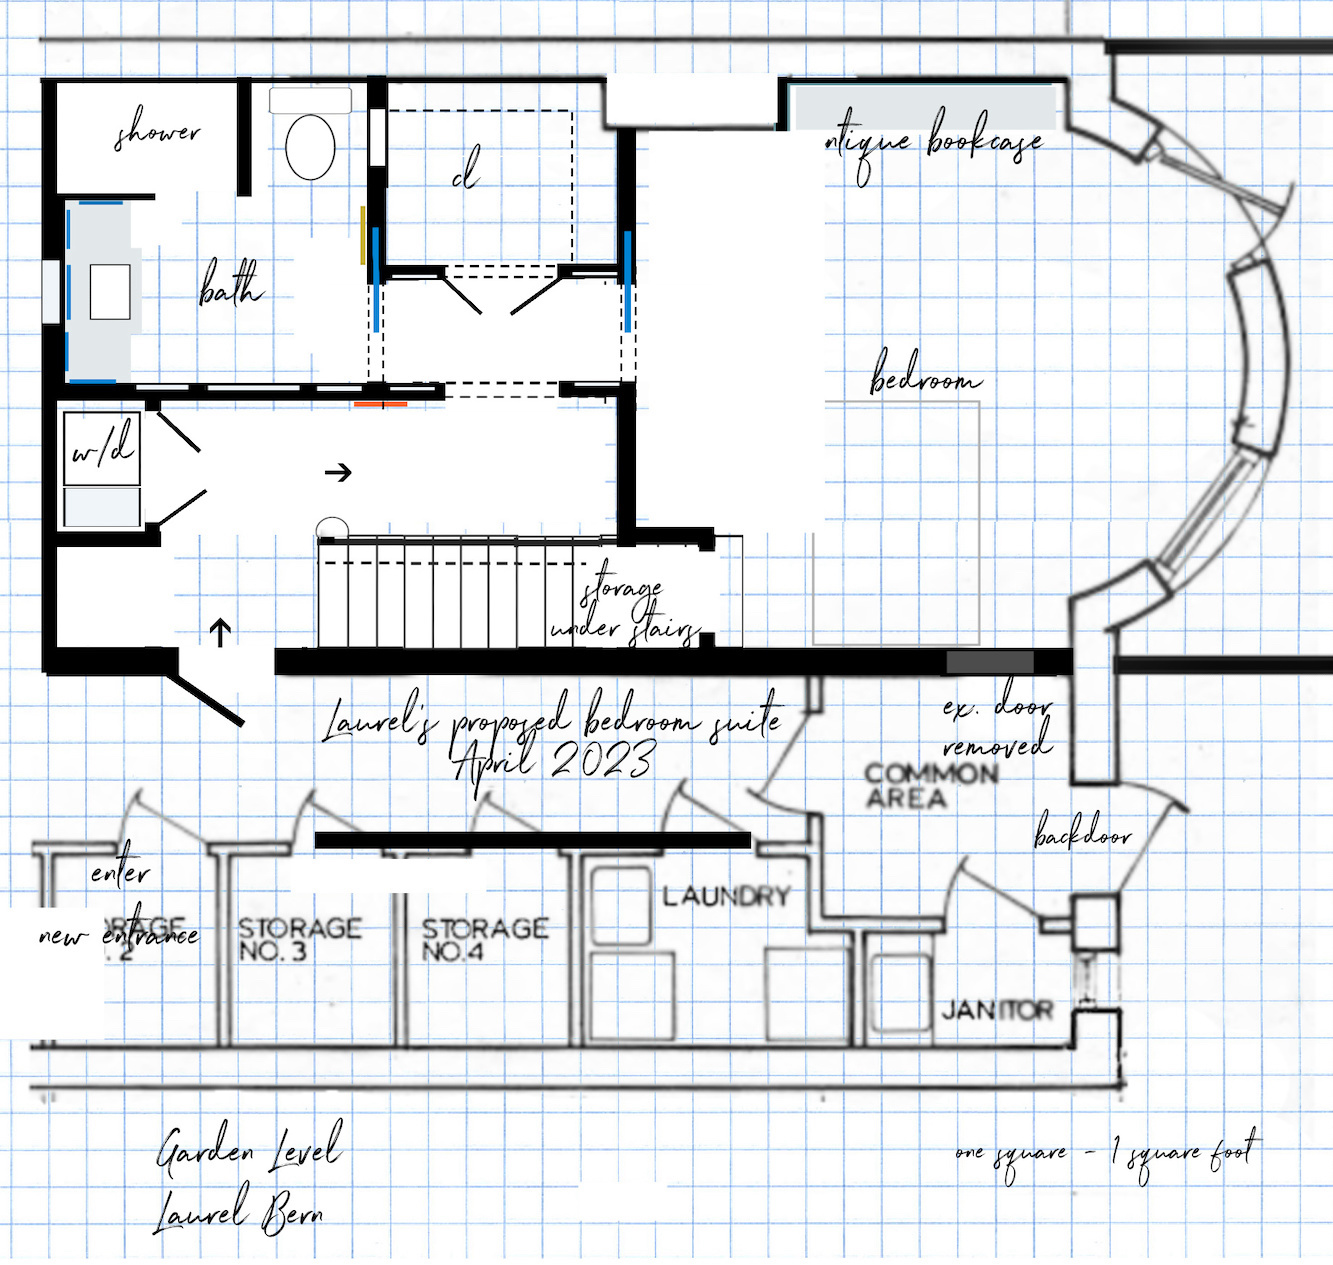 Straight run stairs Garden Level April 24, 2023 proposed plan bedroom suite - renovation countdown